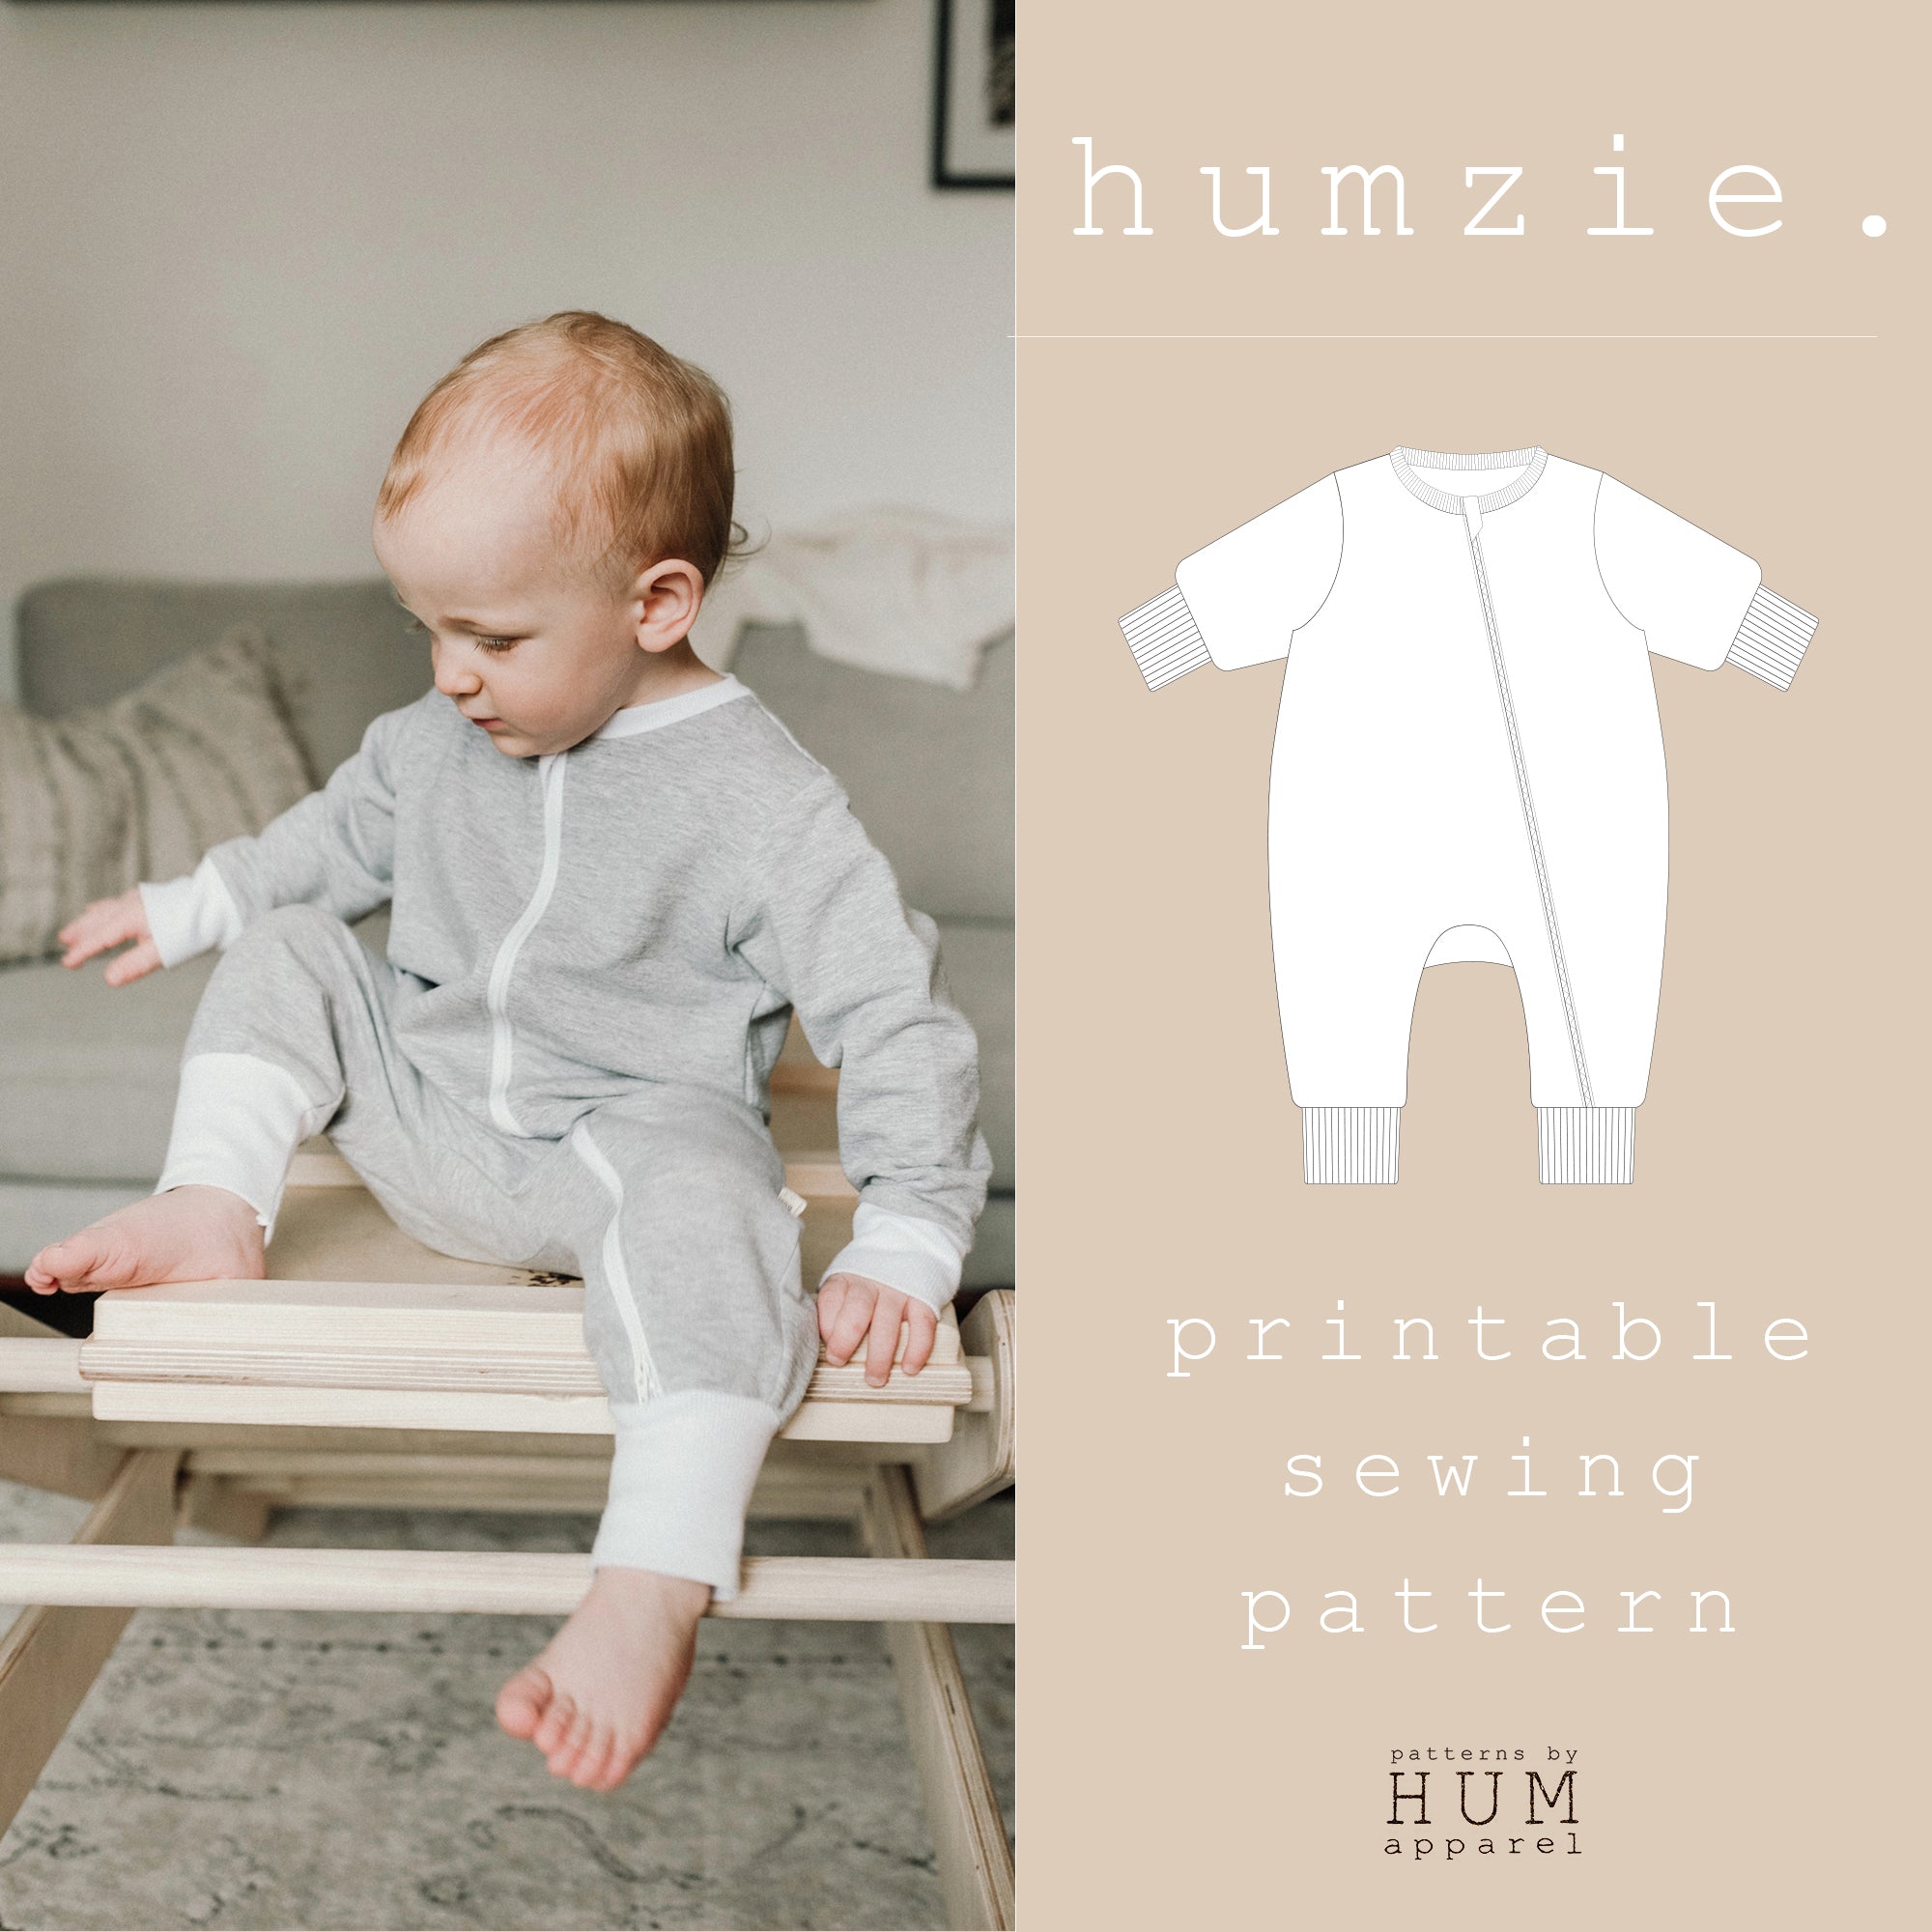 relaxed humzie pattern. – HUM apparel